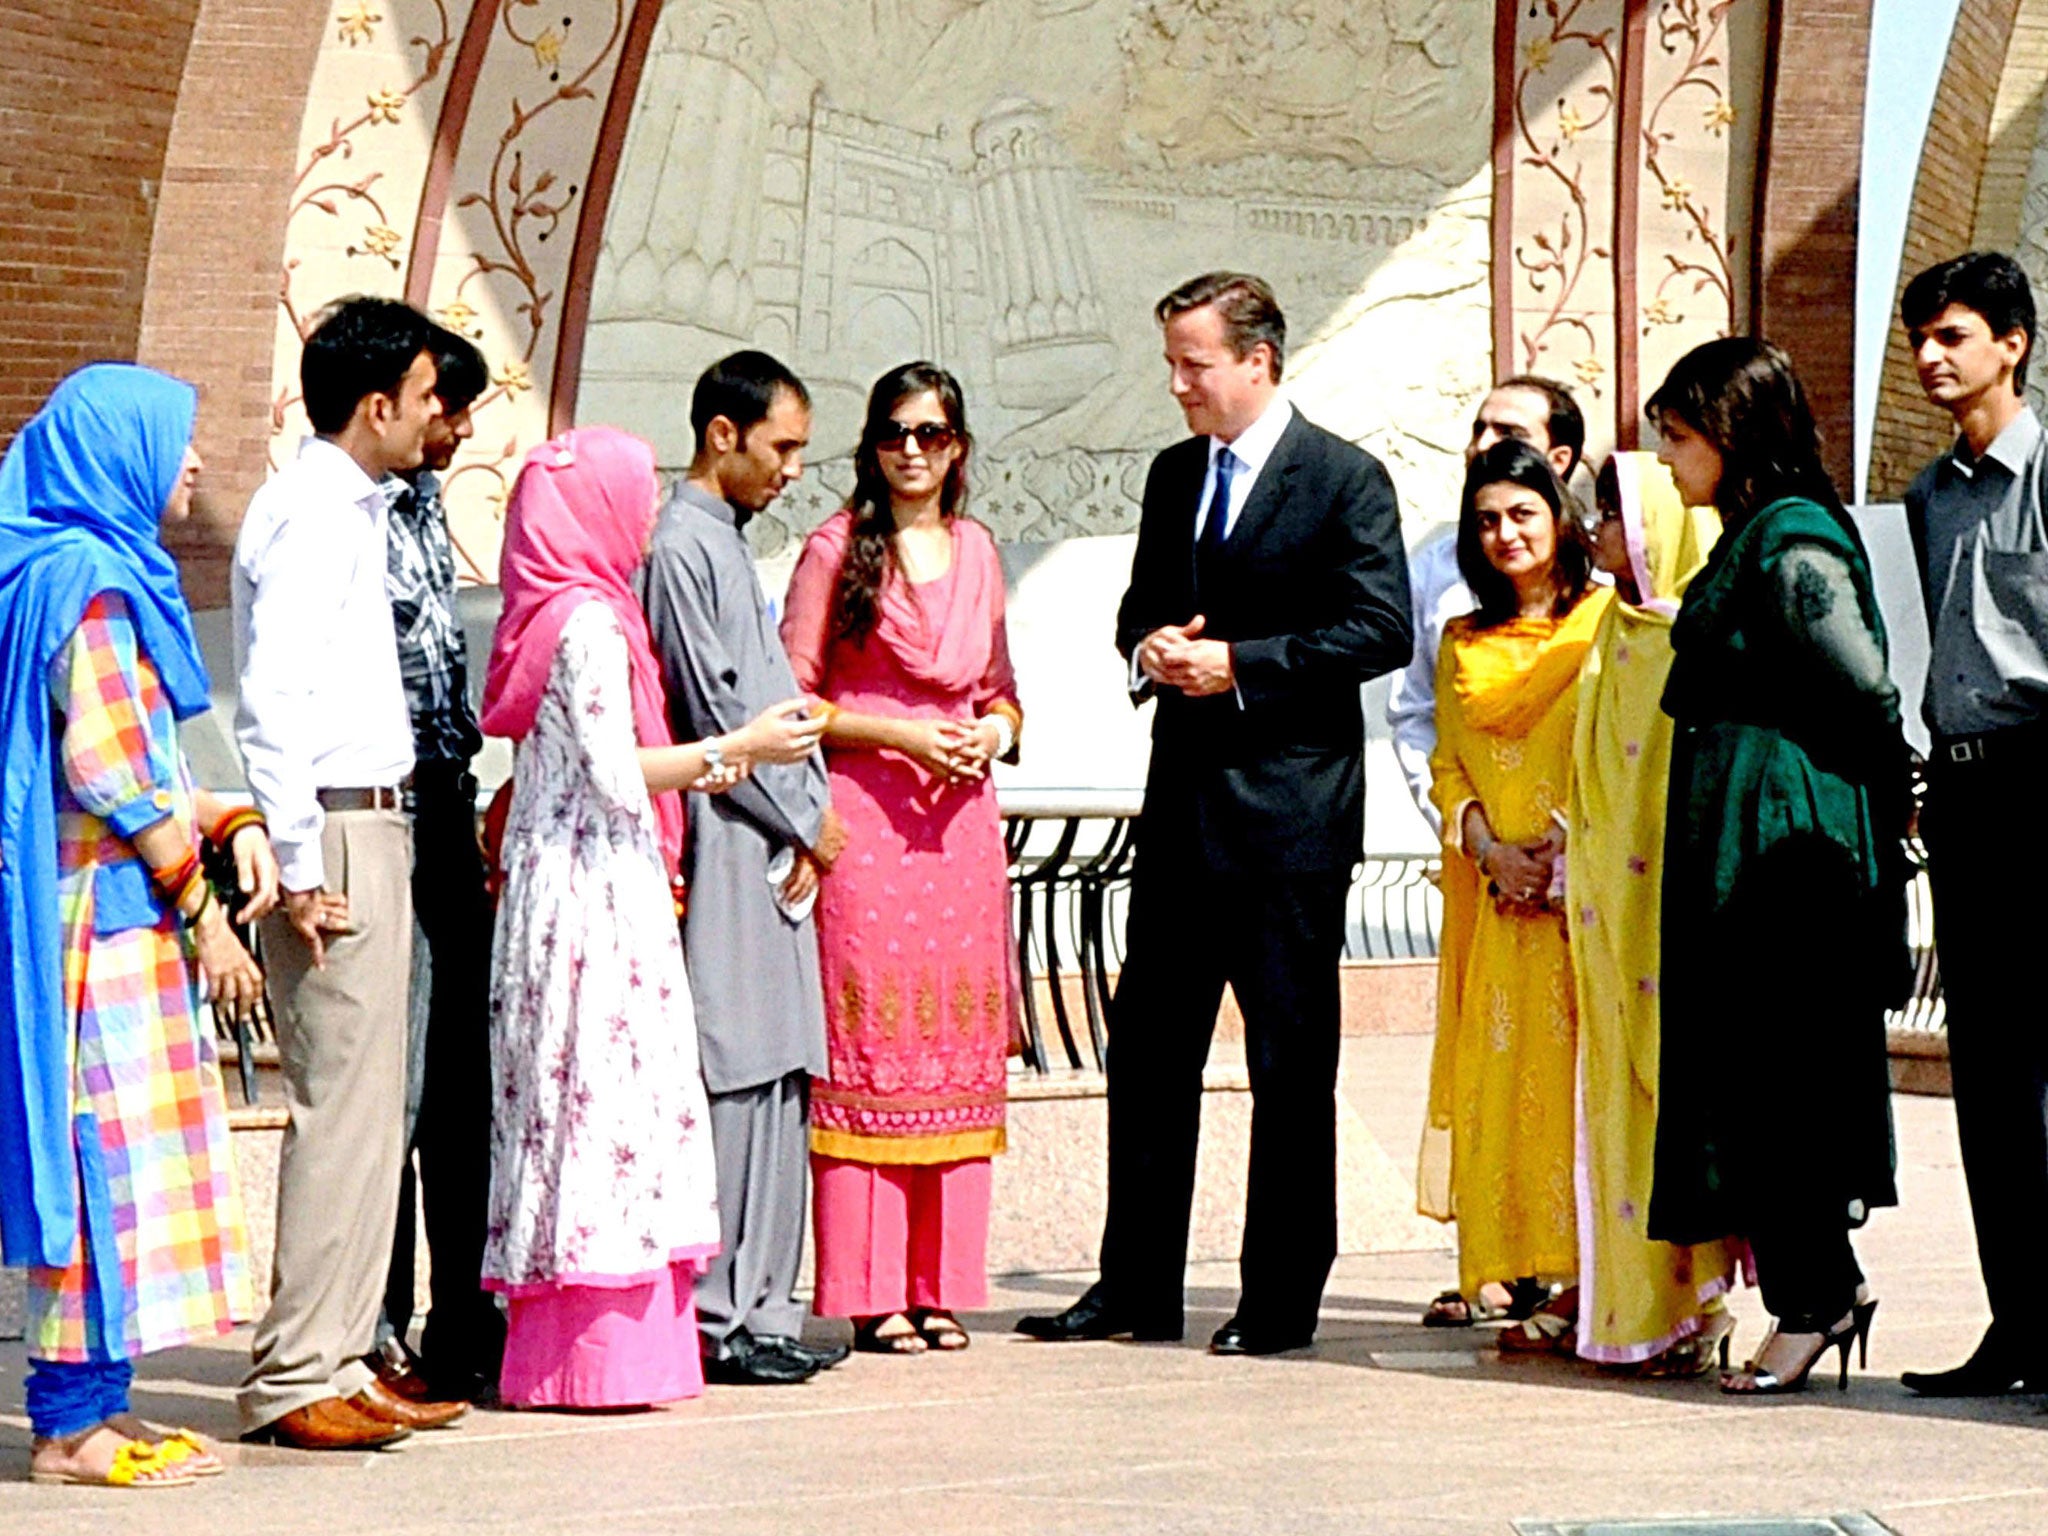 David Cameron talking to a group of Pakistani students in Islamabad